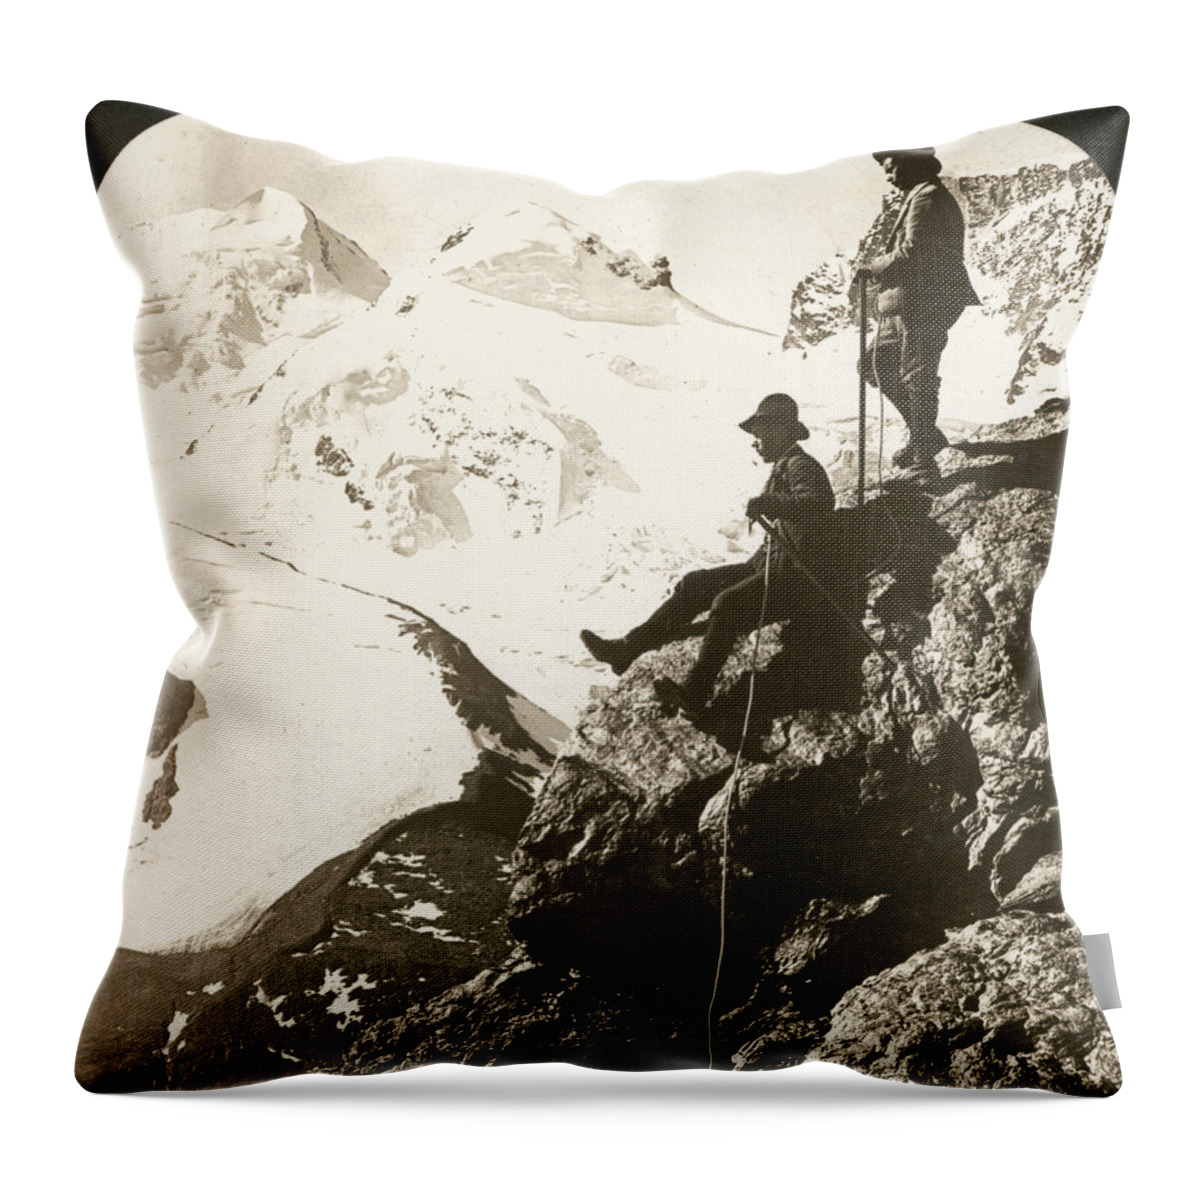 1908 Throw Pillow featuring the photograph Alpine Mountaineers, 1908 by Granger